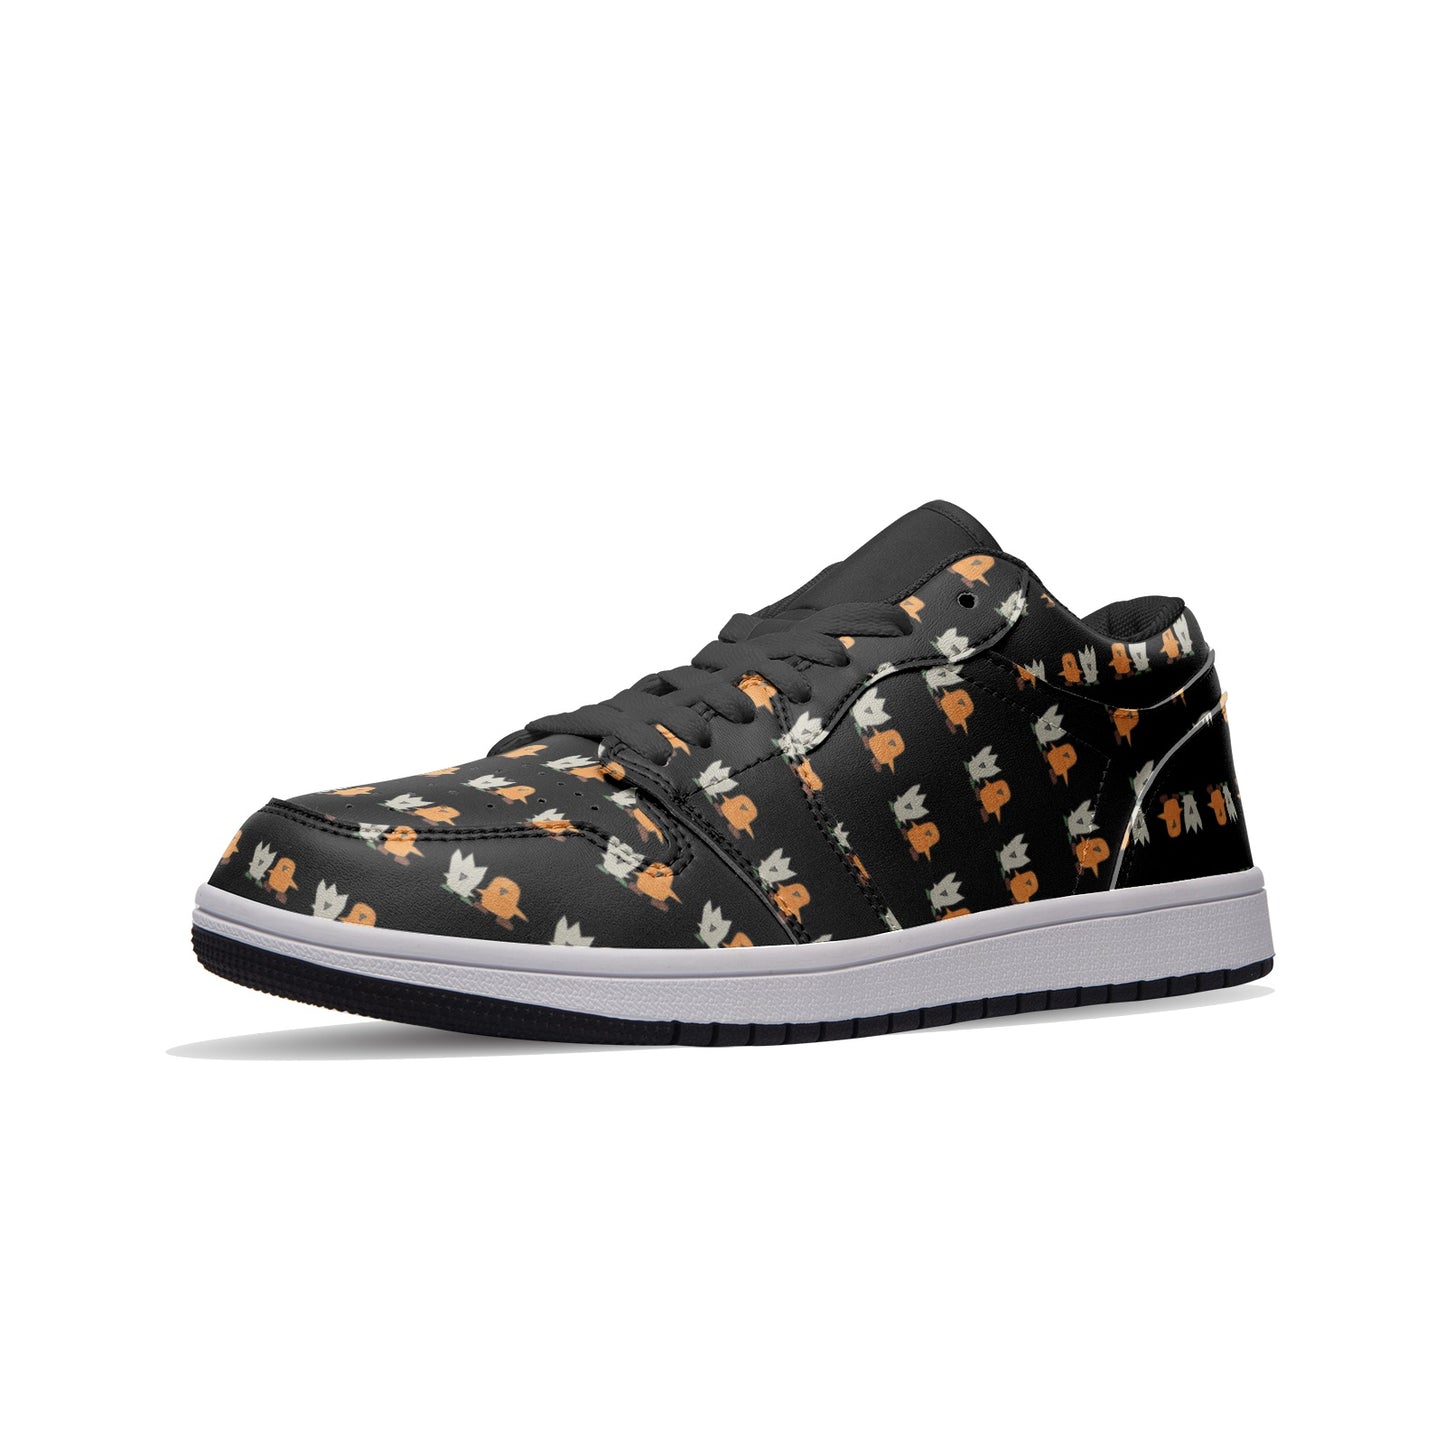 Fuzzy and Muffin by D.B. Unisex Low Top Leather Sneakers